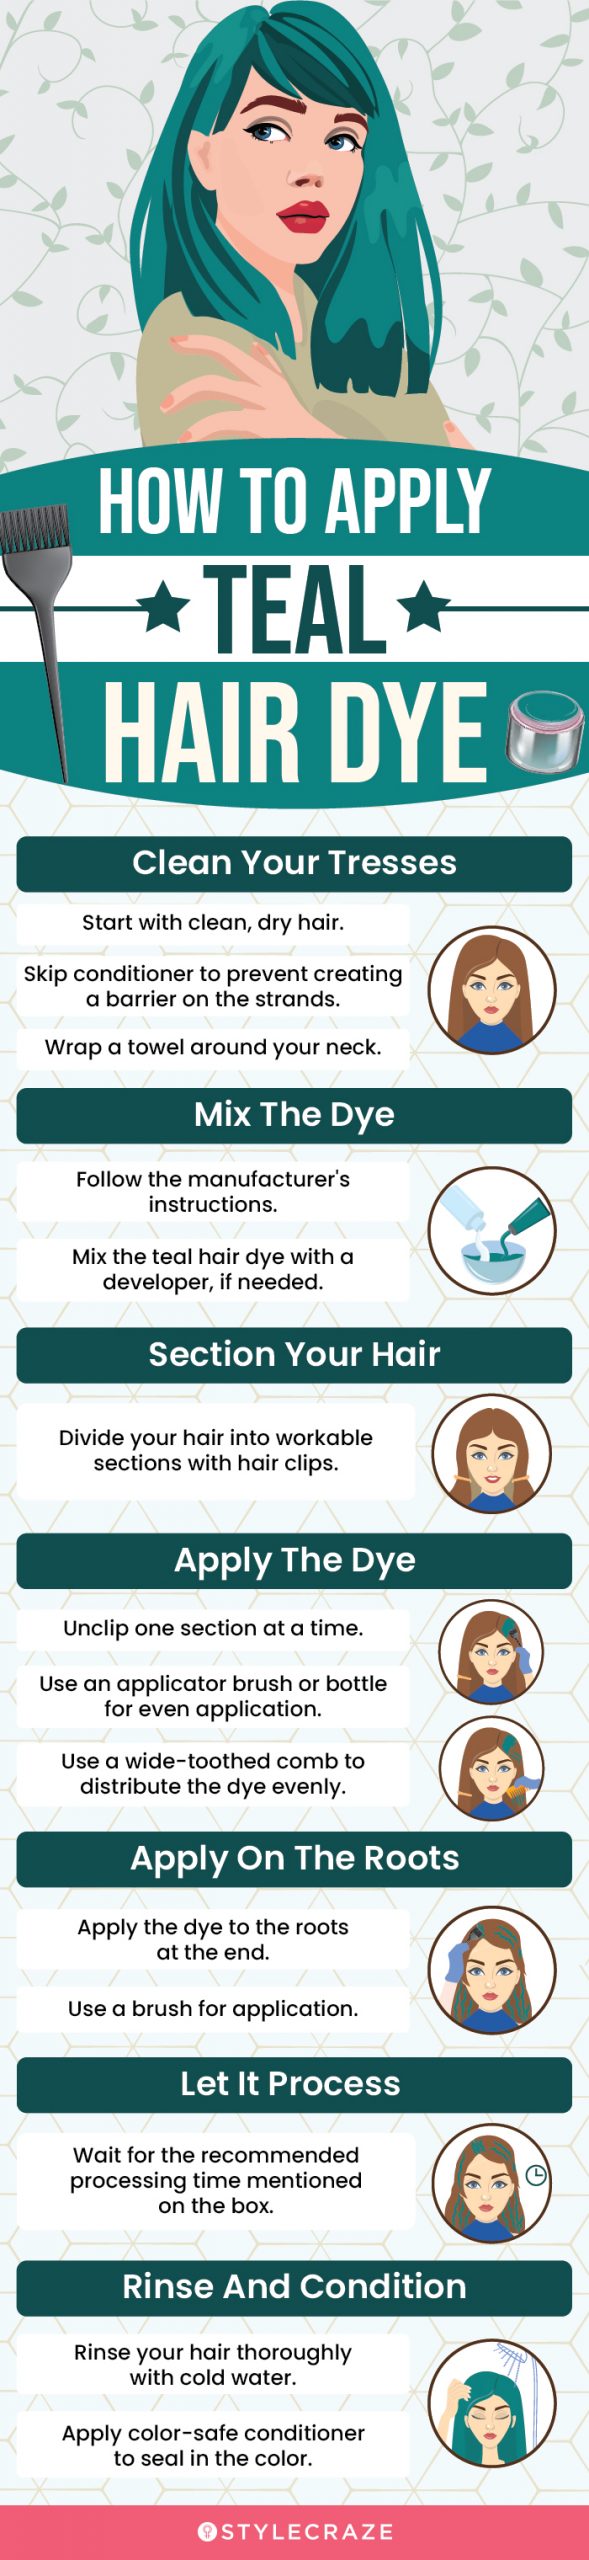 How To Apply Teal Hair Dye (infographic)